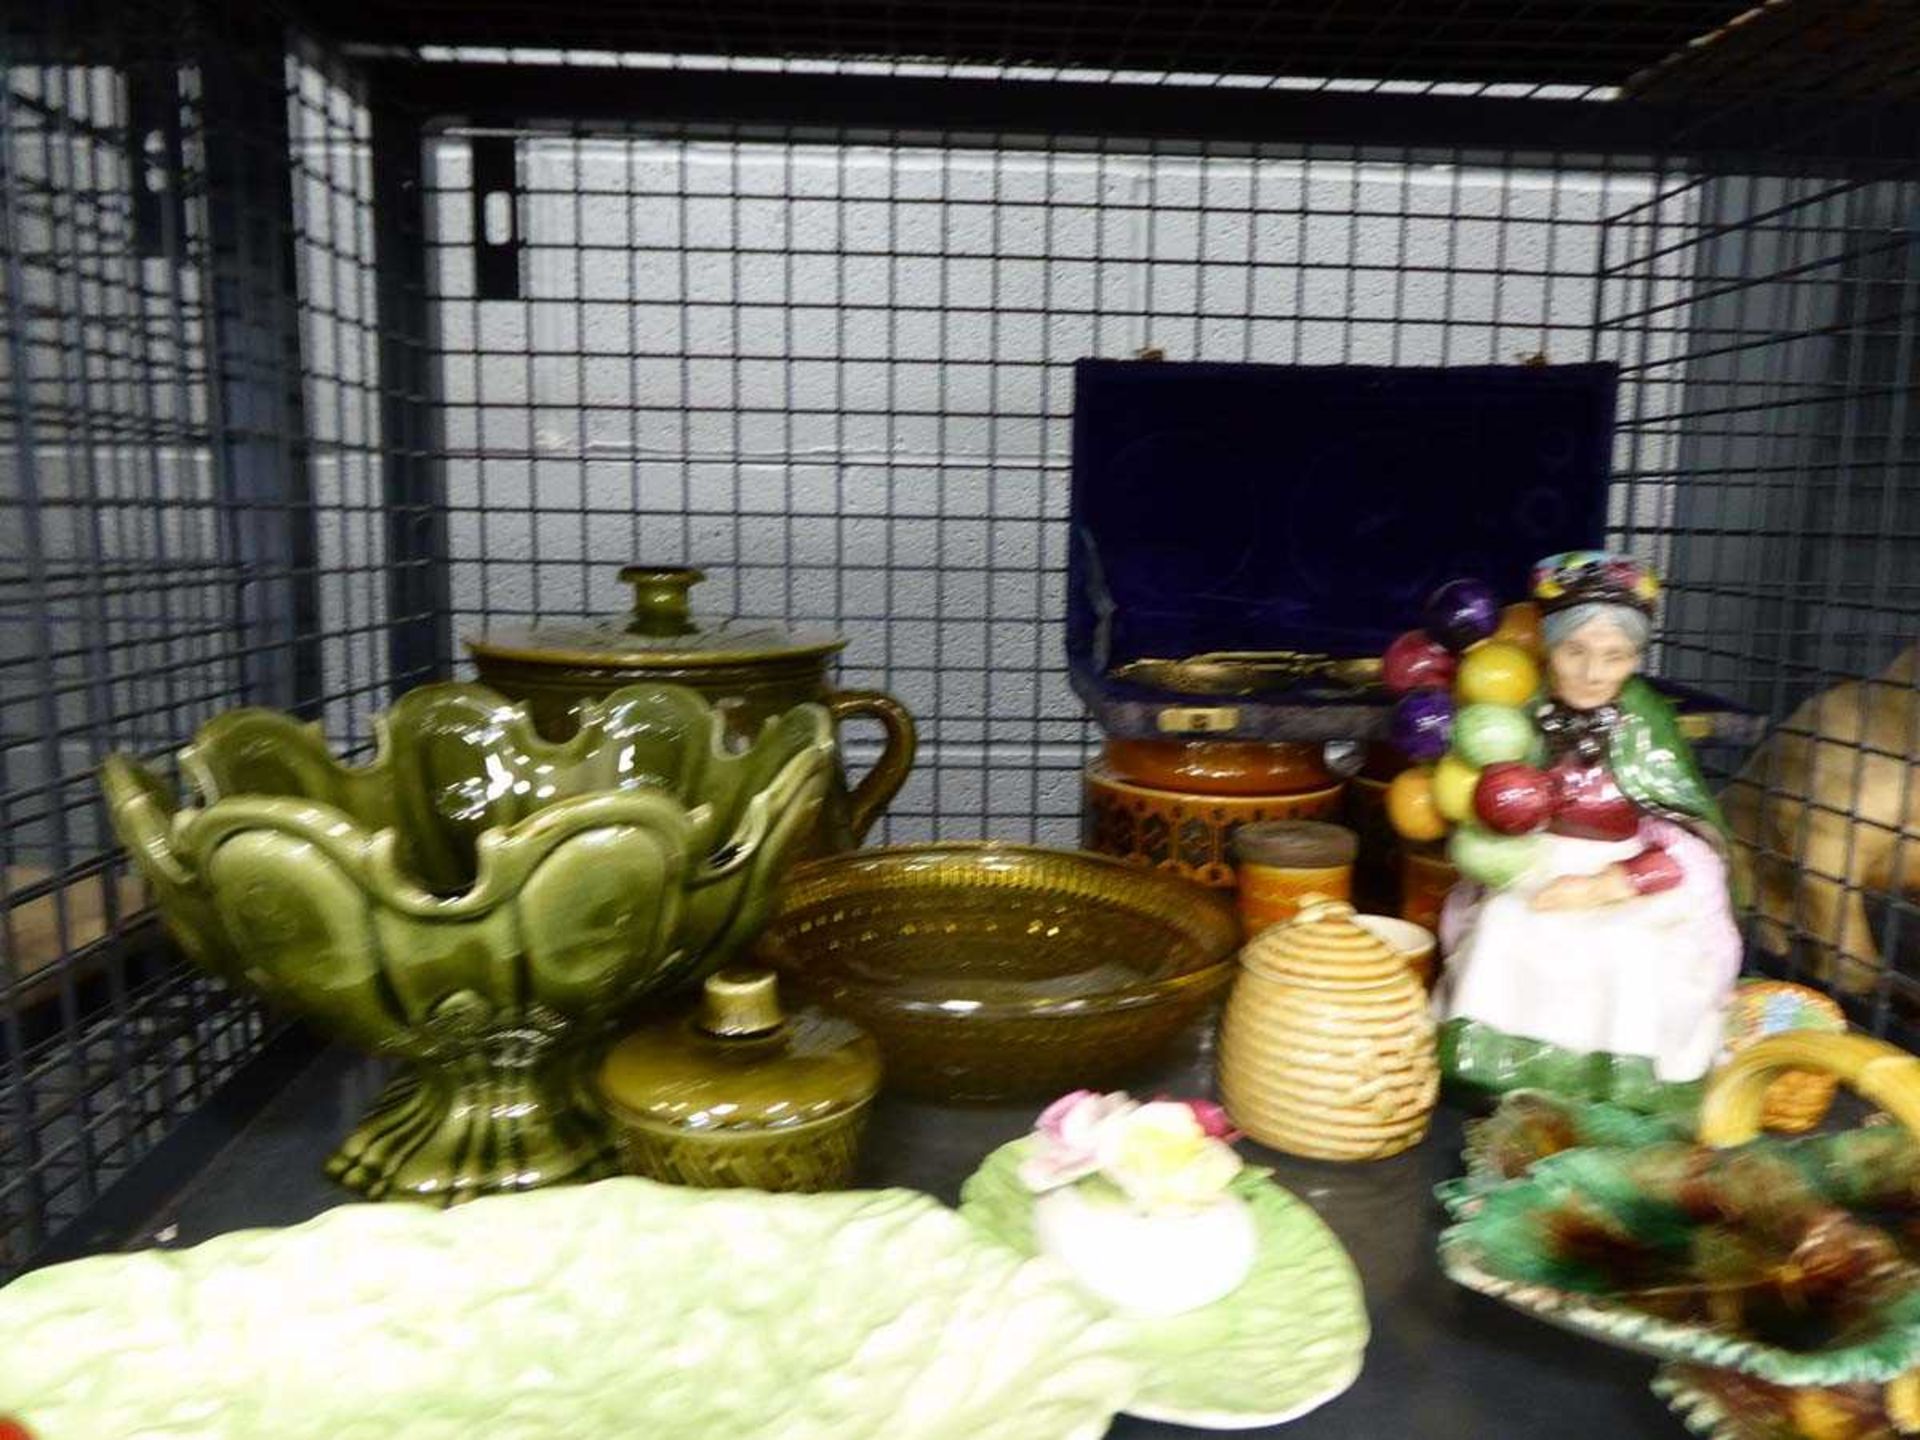 Cage containing Carltonware, green china, set of scales, figurine of old lady selling balloons